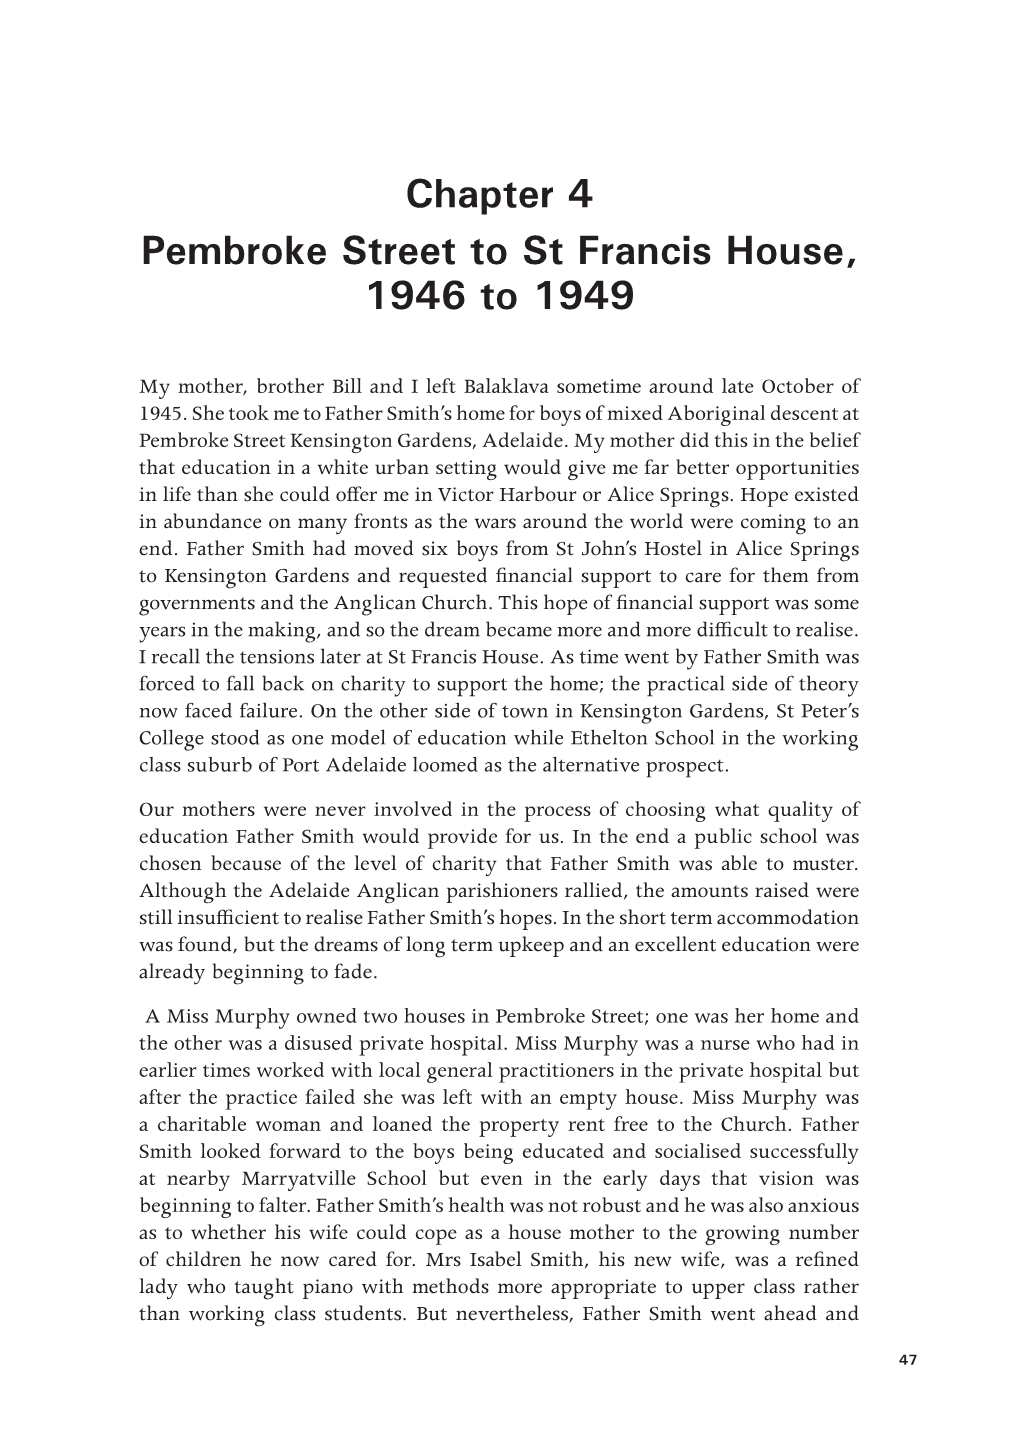 Pembroke Street to St Francis House, 1946 to 1949